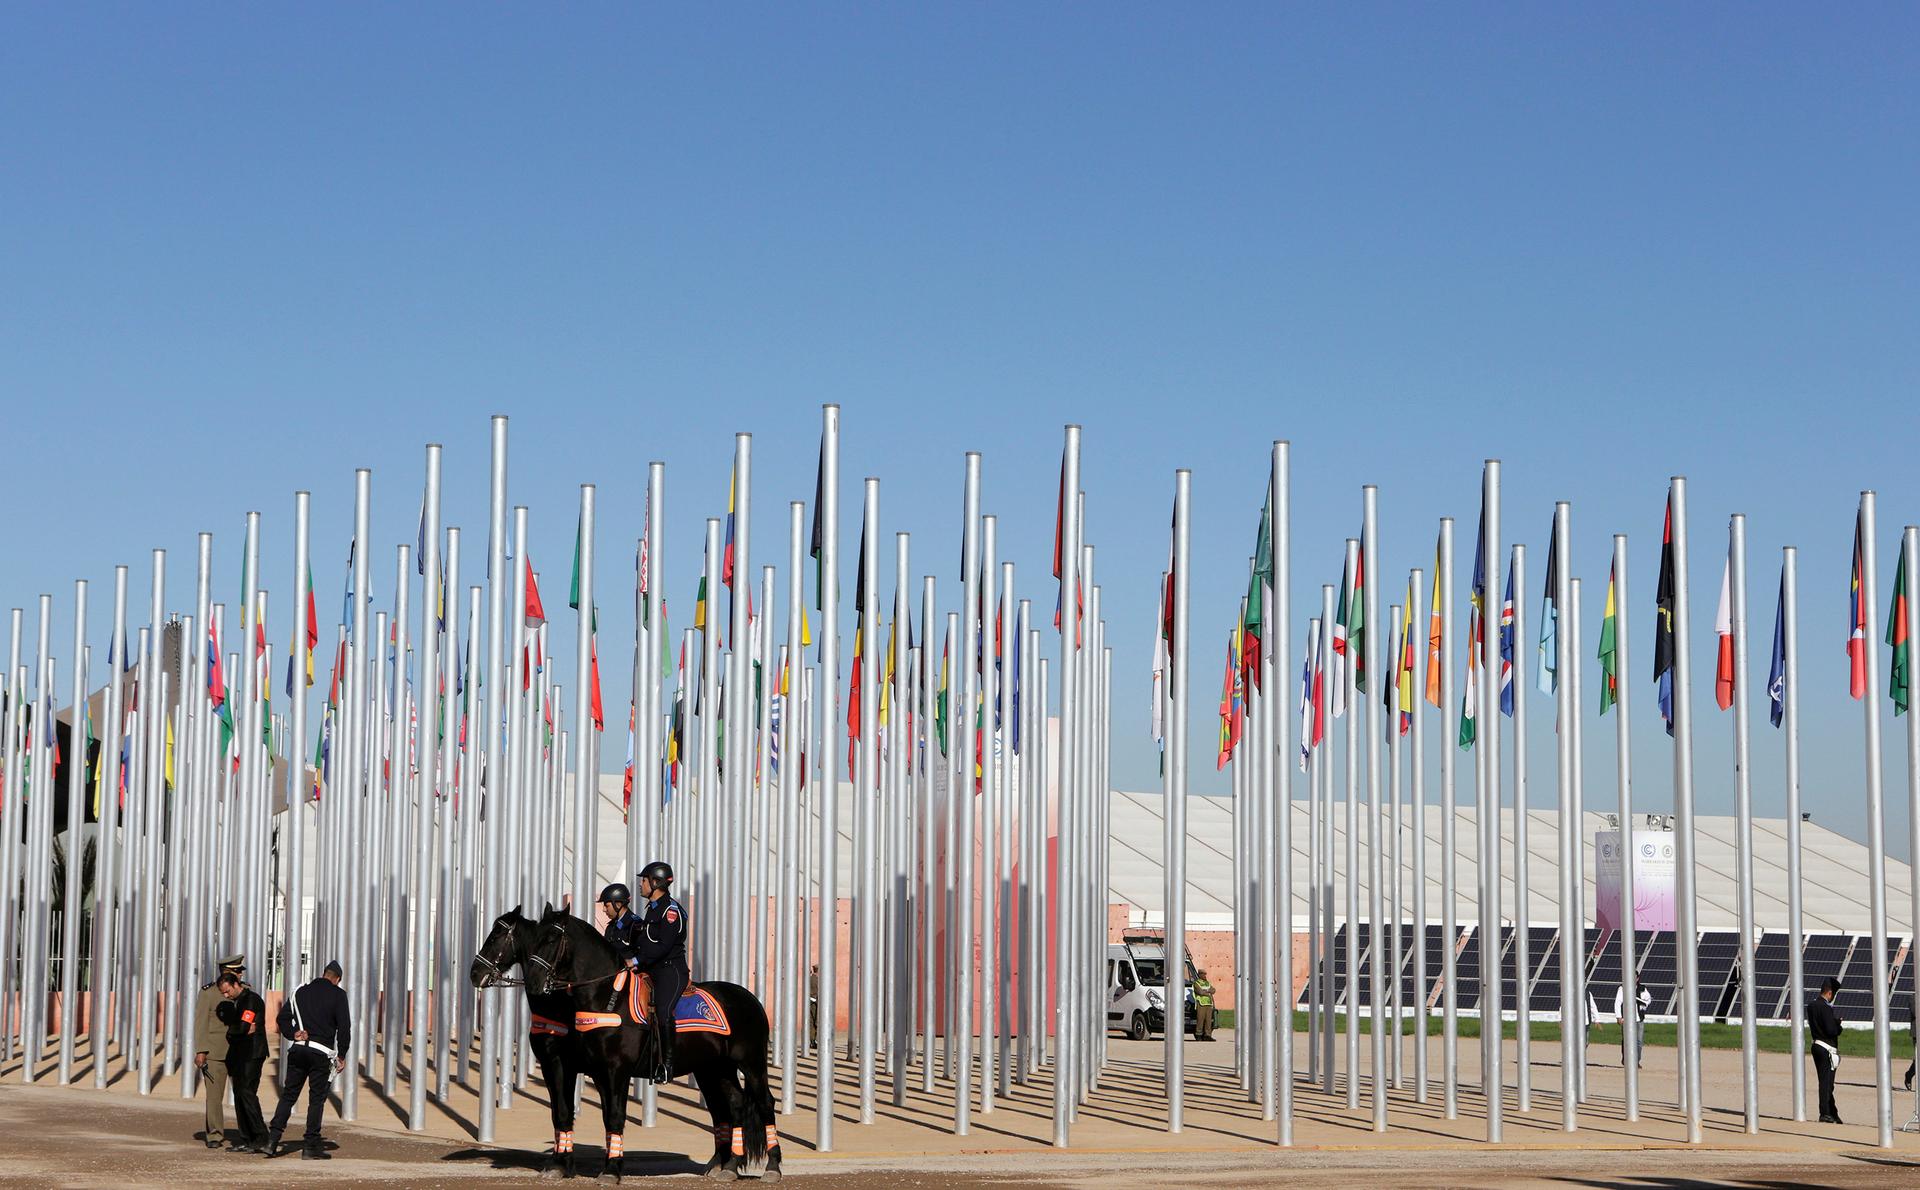 Moroccan security stand guard in front of the entrance of the UN Climate Change Conference 2016 (COP22) in Marrakech, Morocco, November 14, 2016.